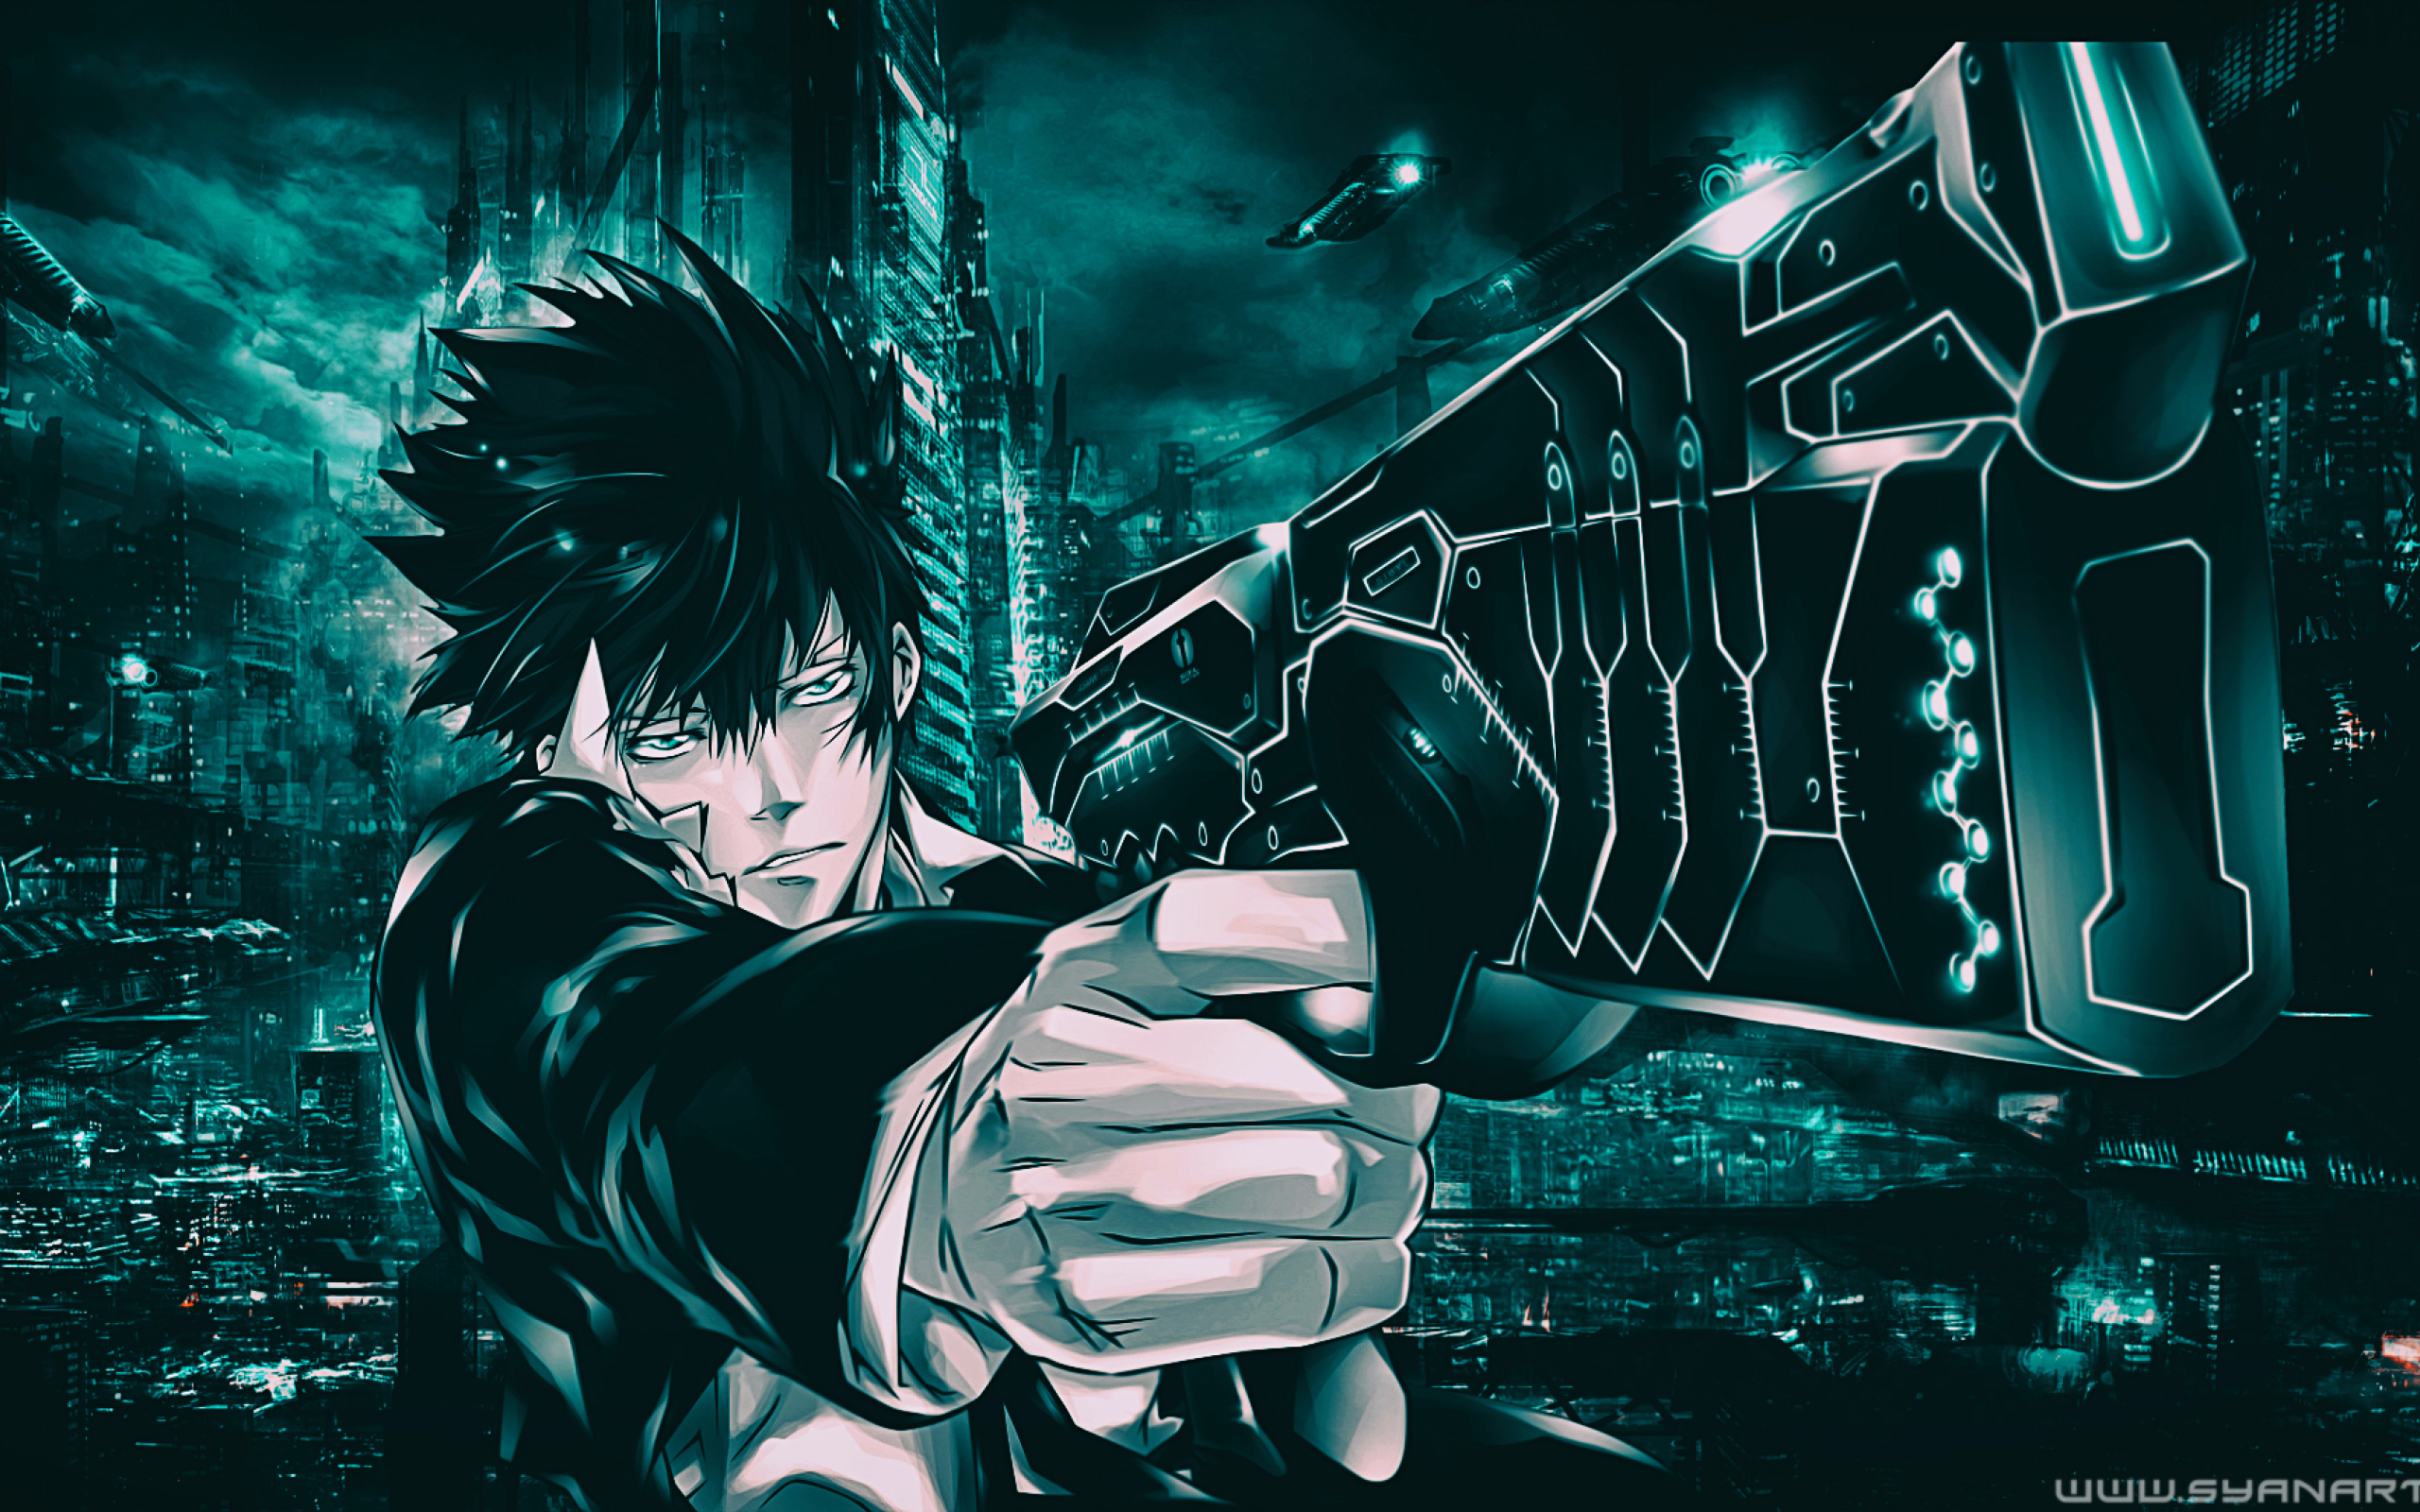 2560x1600 Shinya Kogami From Psycho Pass 2560x1600 Resolution Wallpaper Hd Anime 4k Wallpapers Images Photos And Background